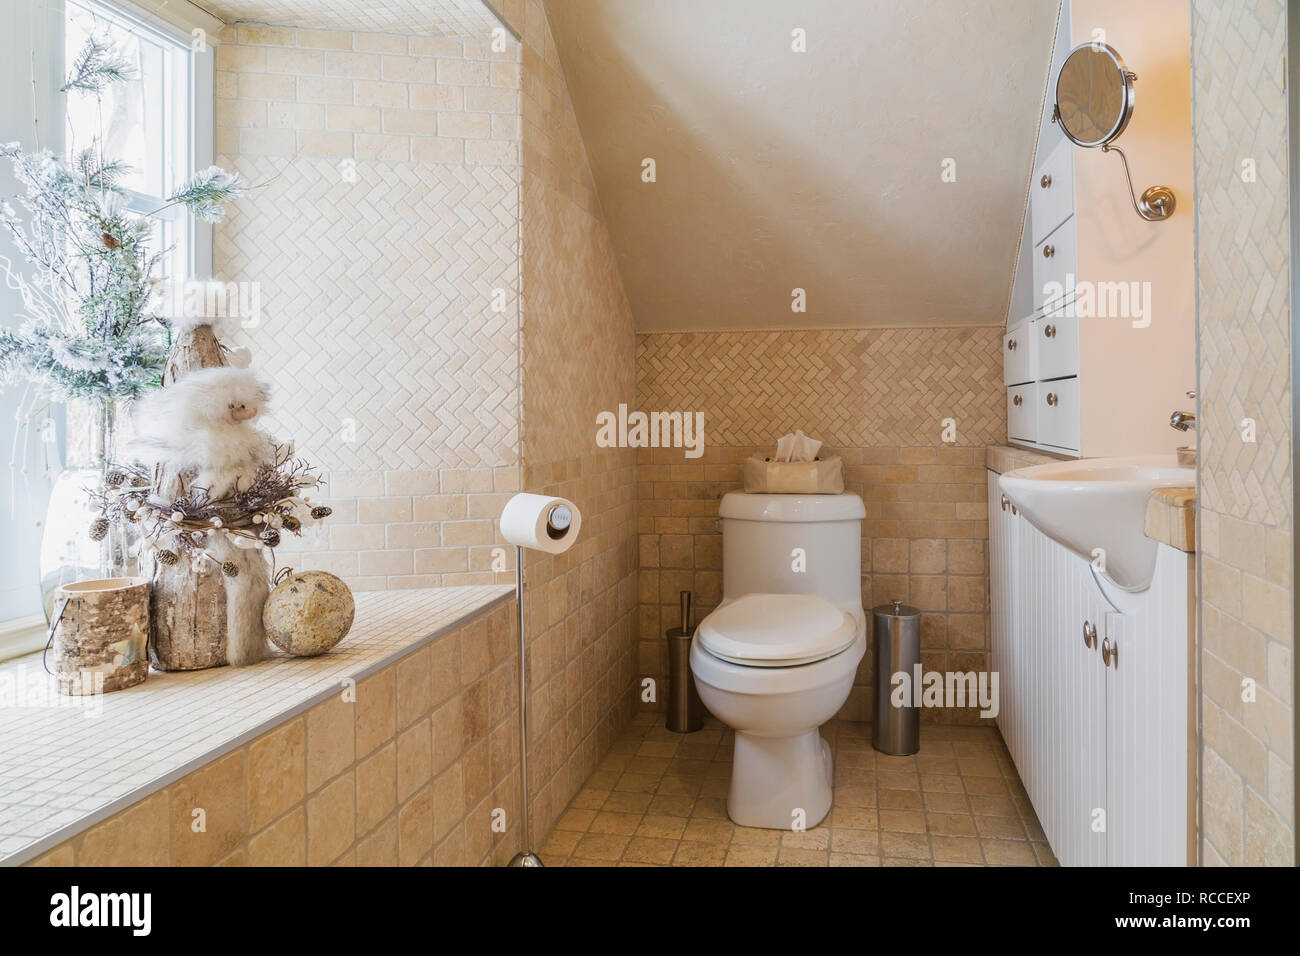 Main bathroom with travertine tile floor on the upstairs floor inside an old renovated circa 1840 Canadiana cottage style home Stock Photo